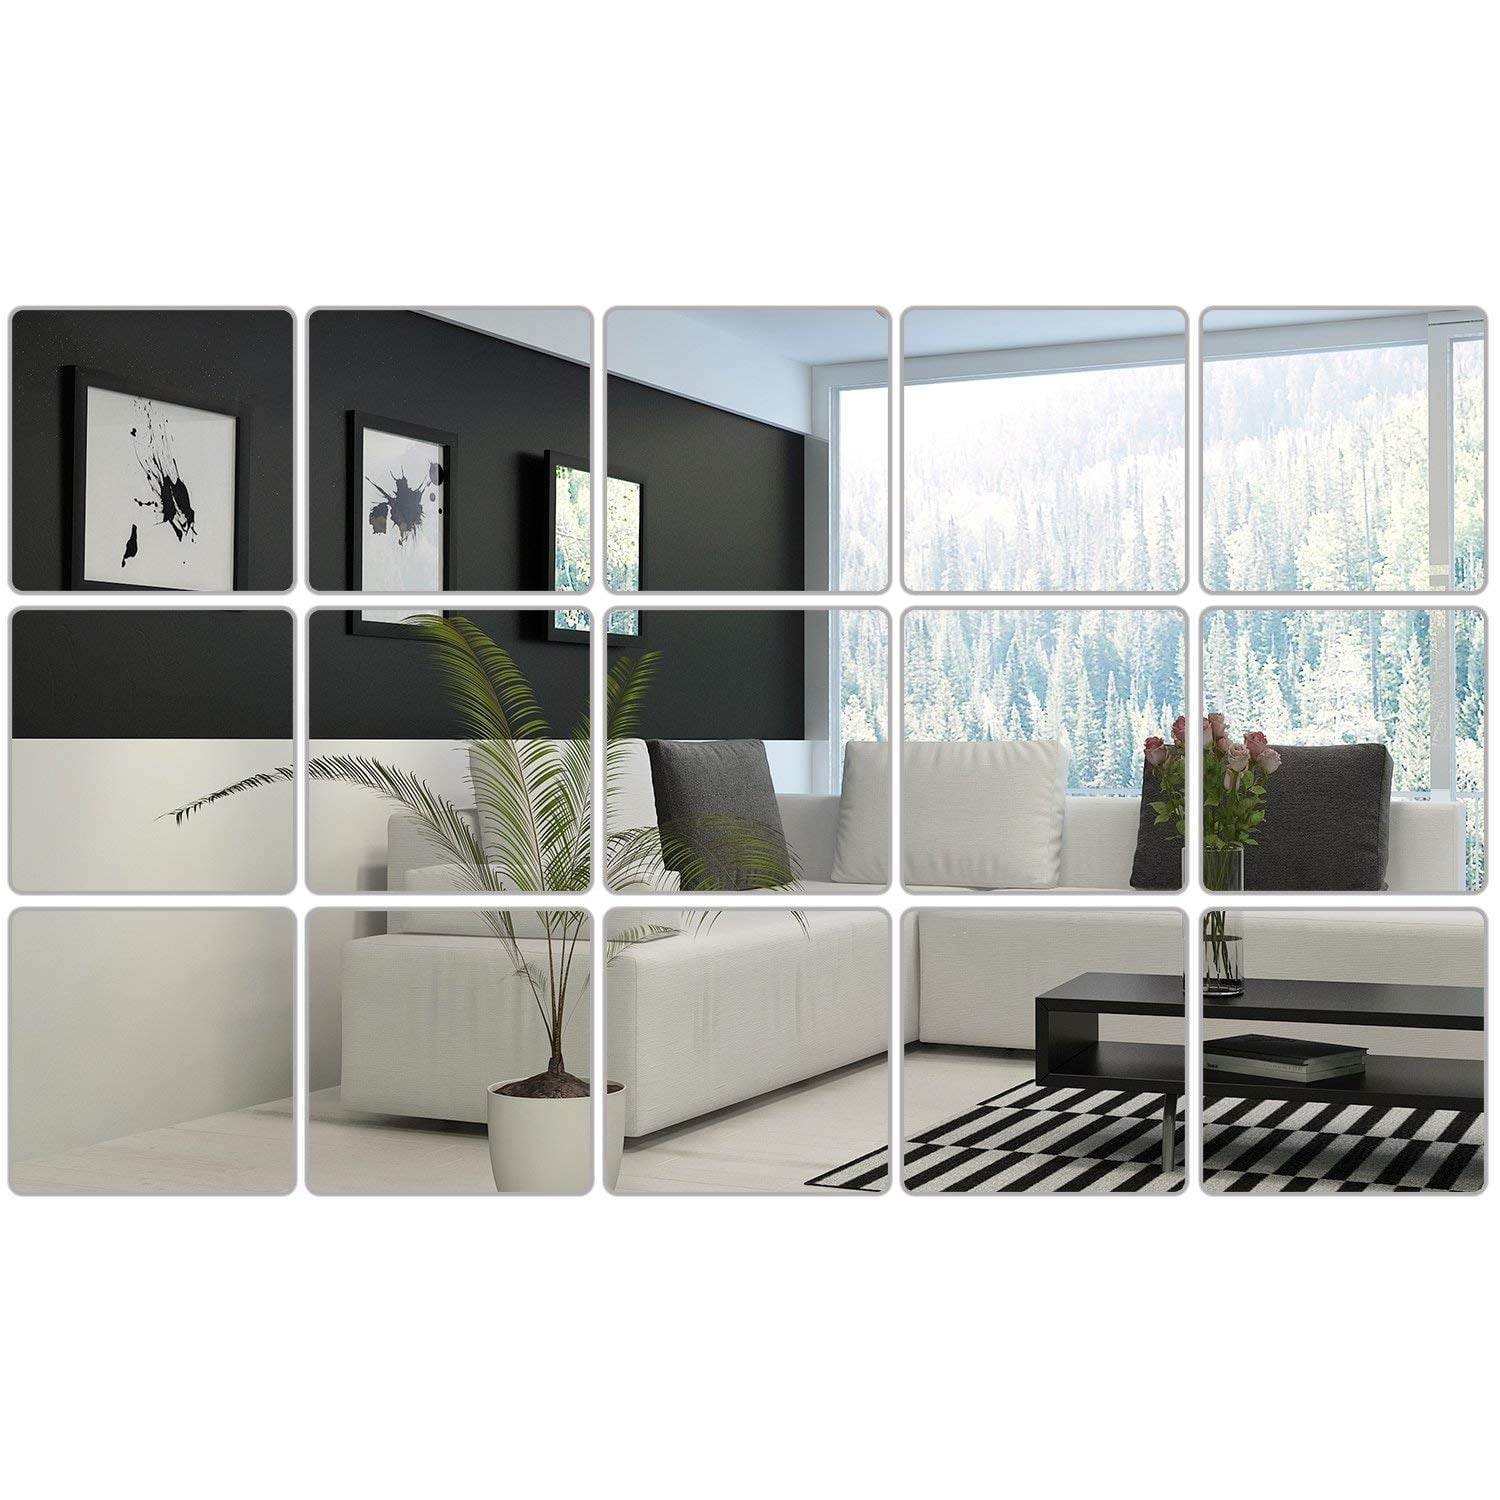 Quality Adhesive Mirror Sheet 6 x 9 Inches Flexible Mirrors Sheets,  Non-Glass Self Adhesive Stick on Mirror Tiles, Cut Mirror Stickers to Size, Peel  and Stick, Great for Crafts and Mirror Wall